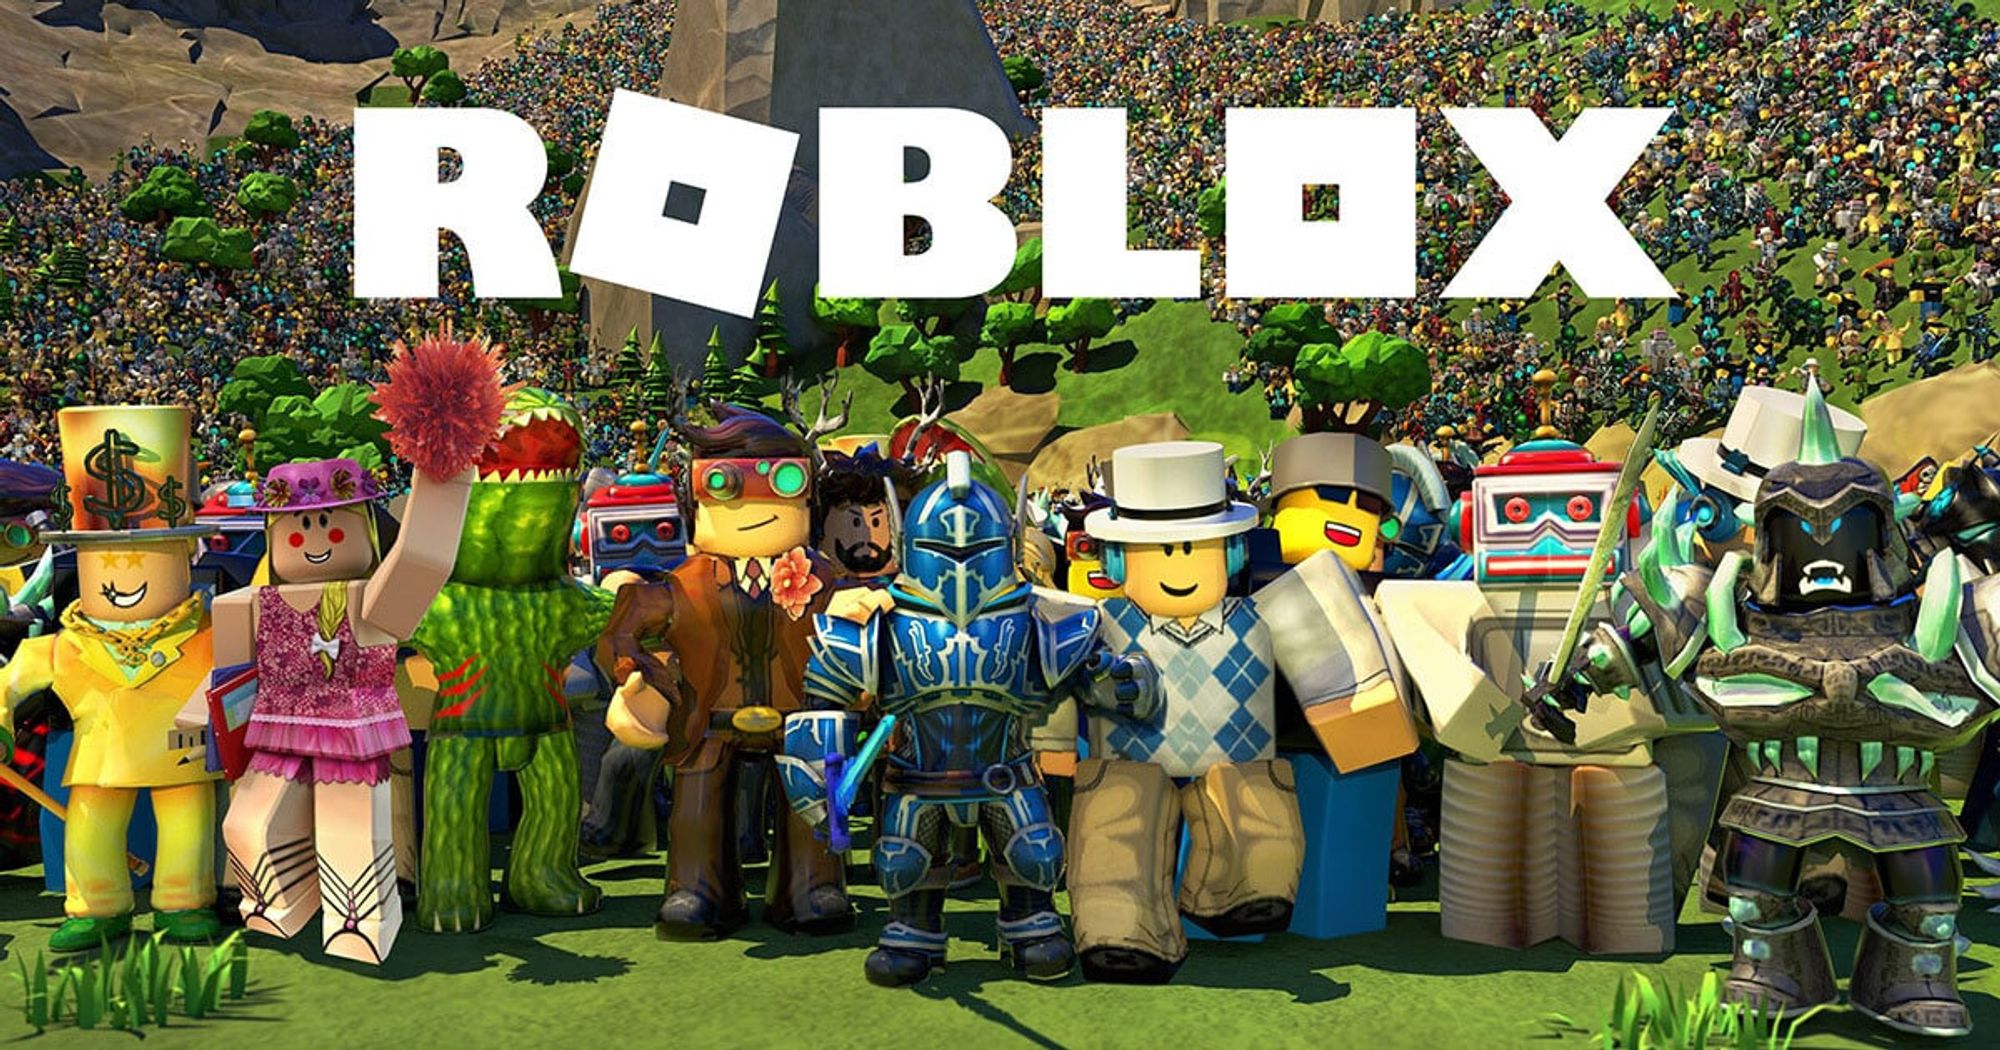 Free Roblox Codes Free Roblox Gift Card Code 2019 No Survey No Verification - how to get free roblox gift card codes roblox gifts